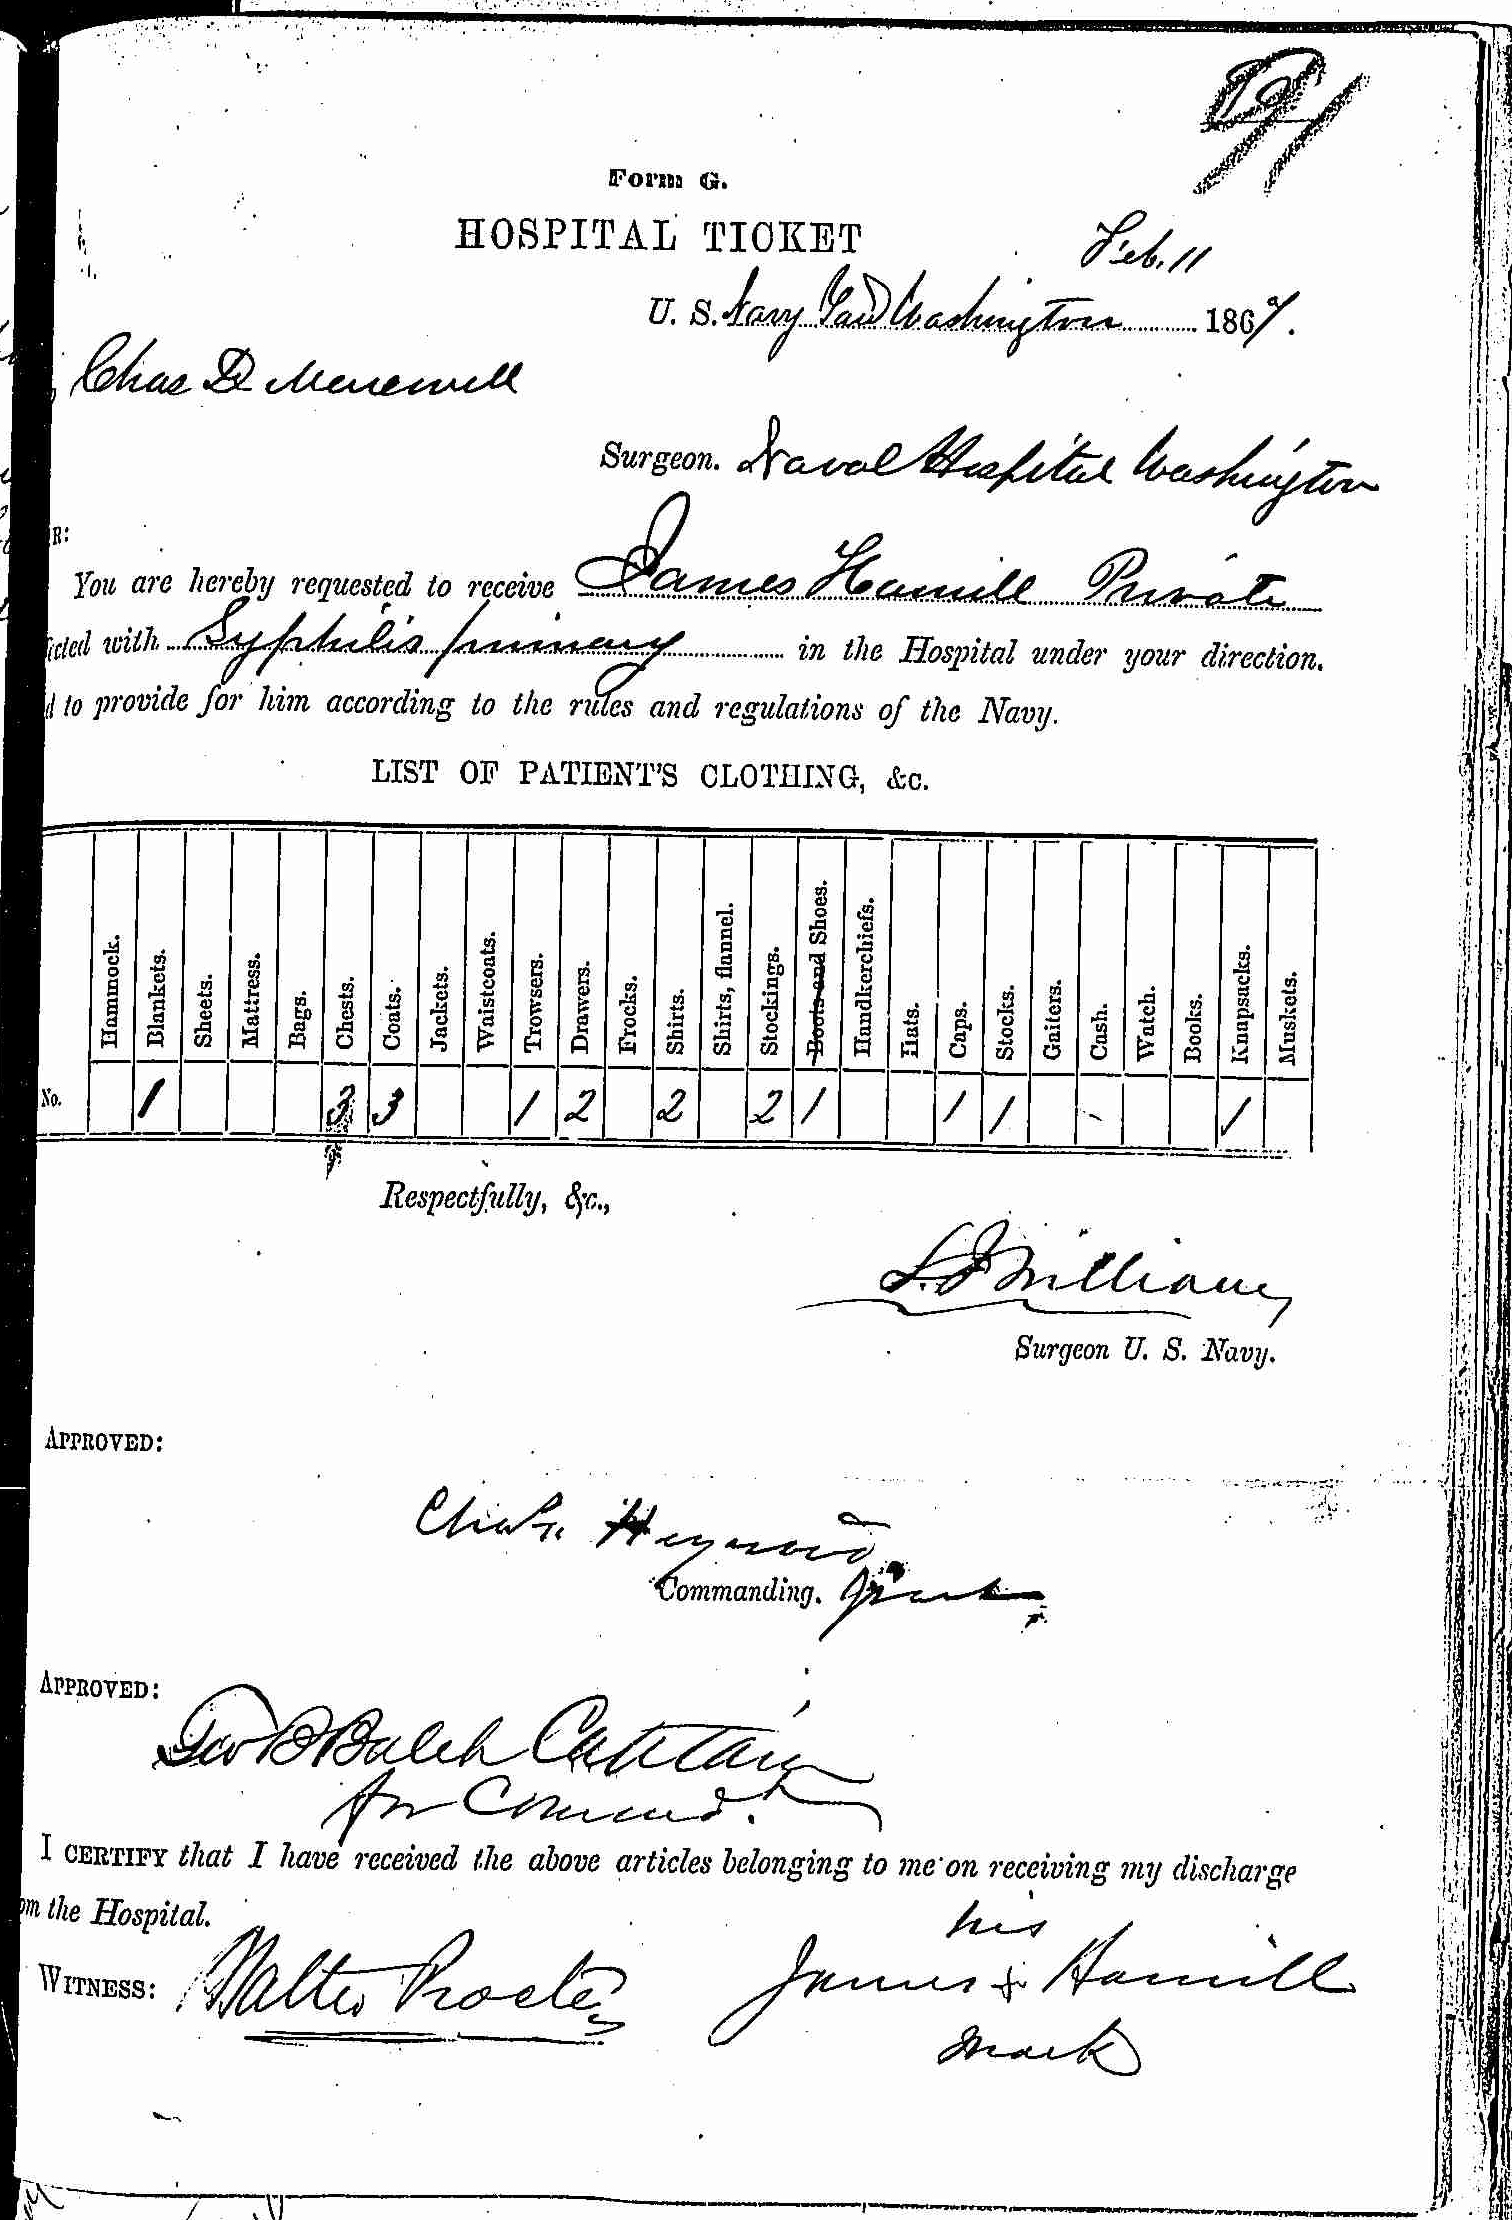 Entry for James Hamill (page 1 of 2) in the log Hospital Tickets and Case Papers - Naval Hospital - Washington, D.C. - 1865-68